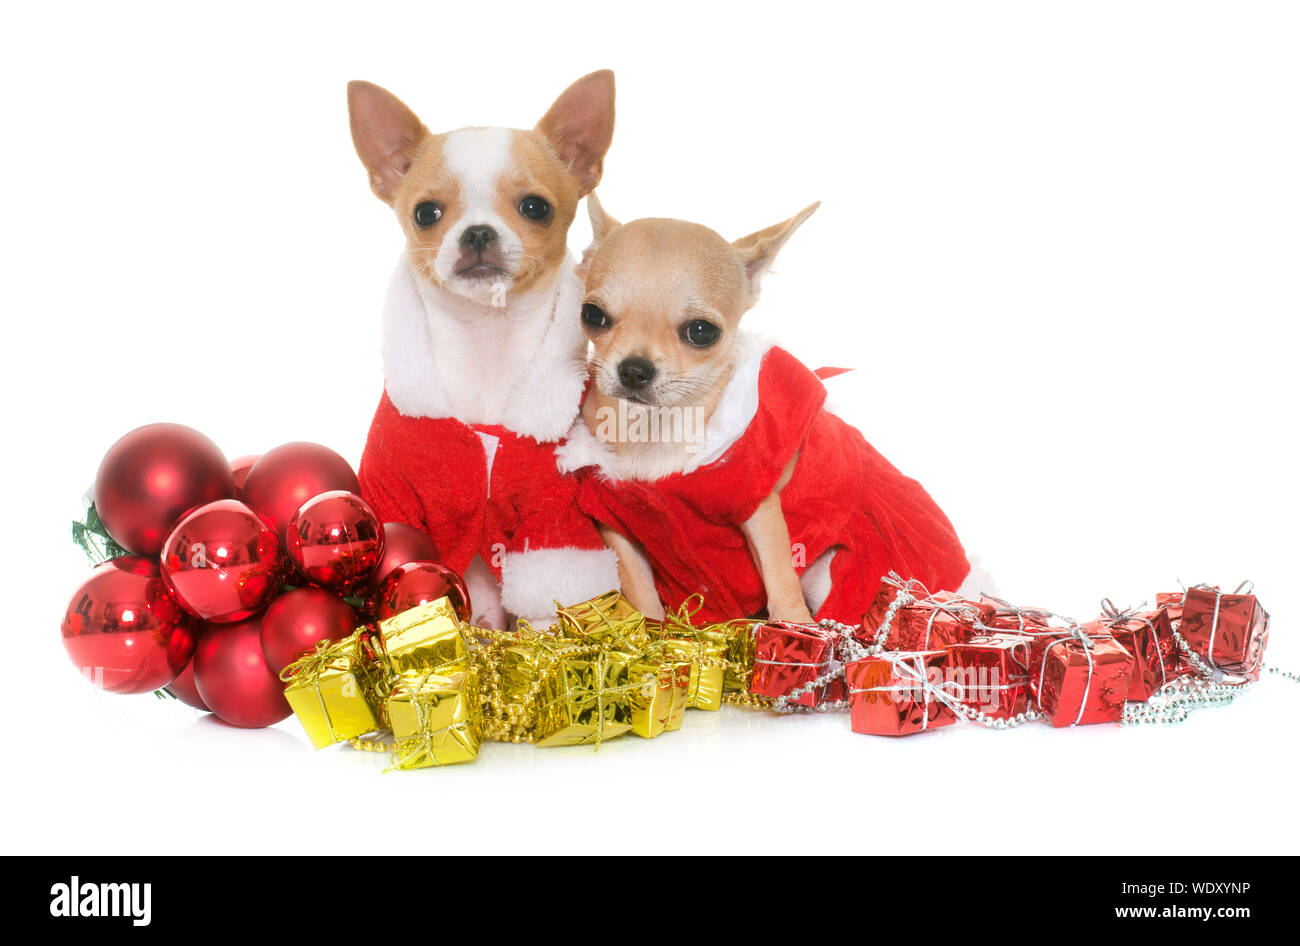 Dogs Wearing Christmas Costume Against White Background Stock Photo